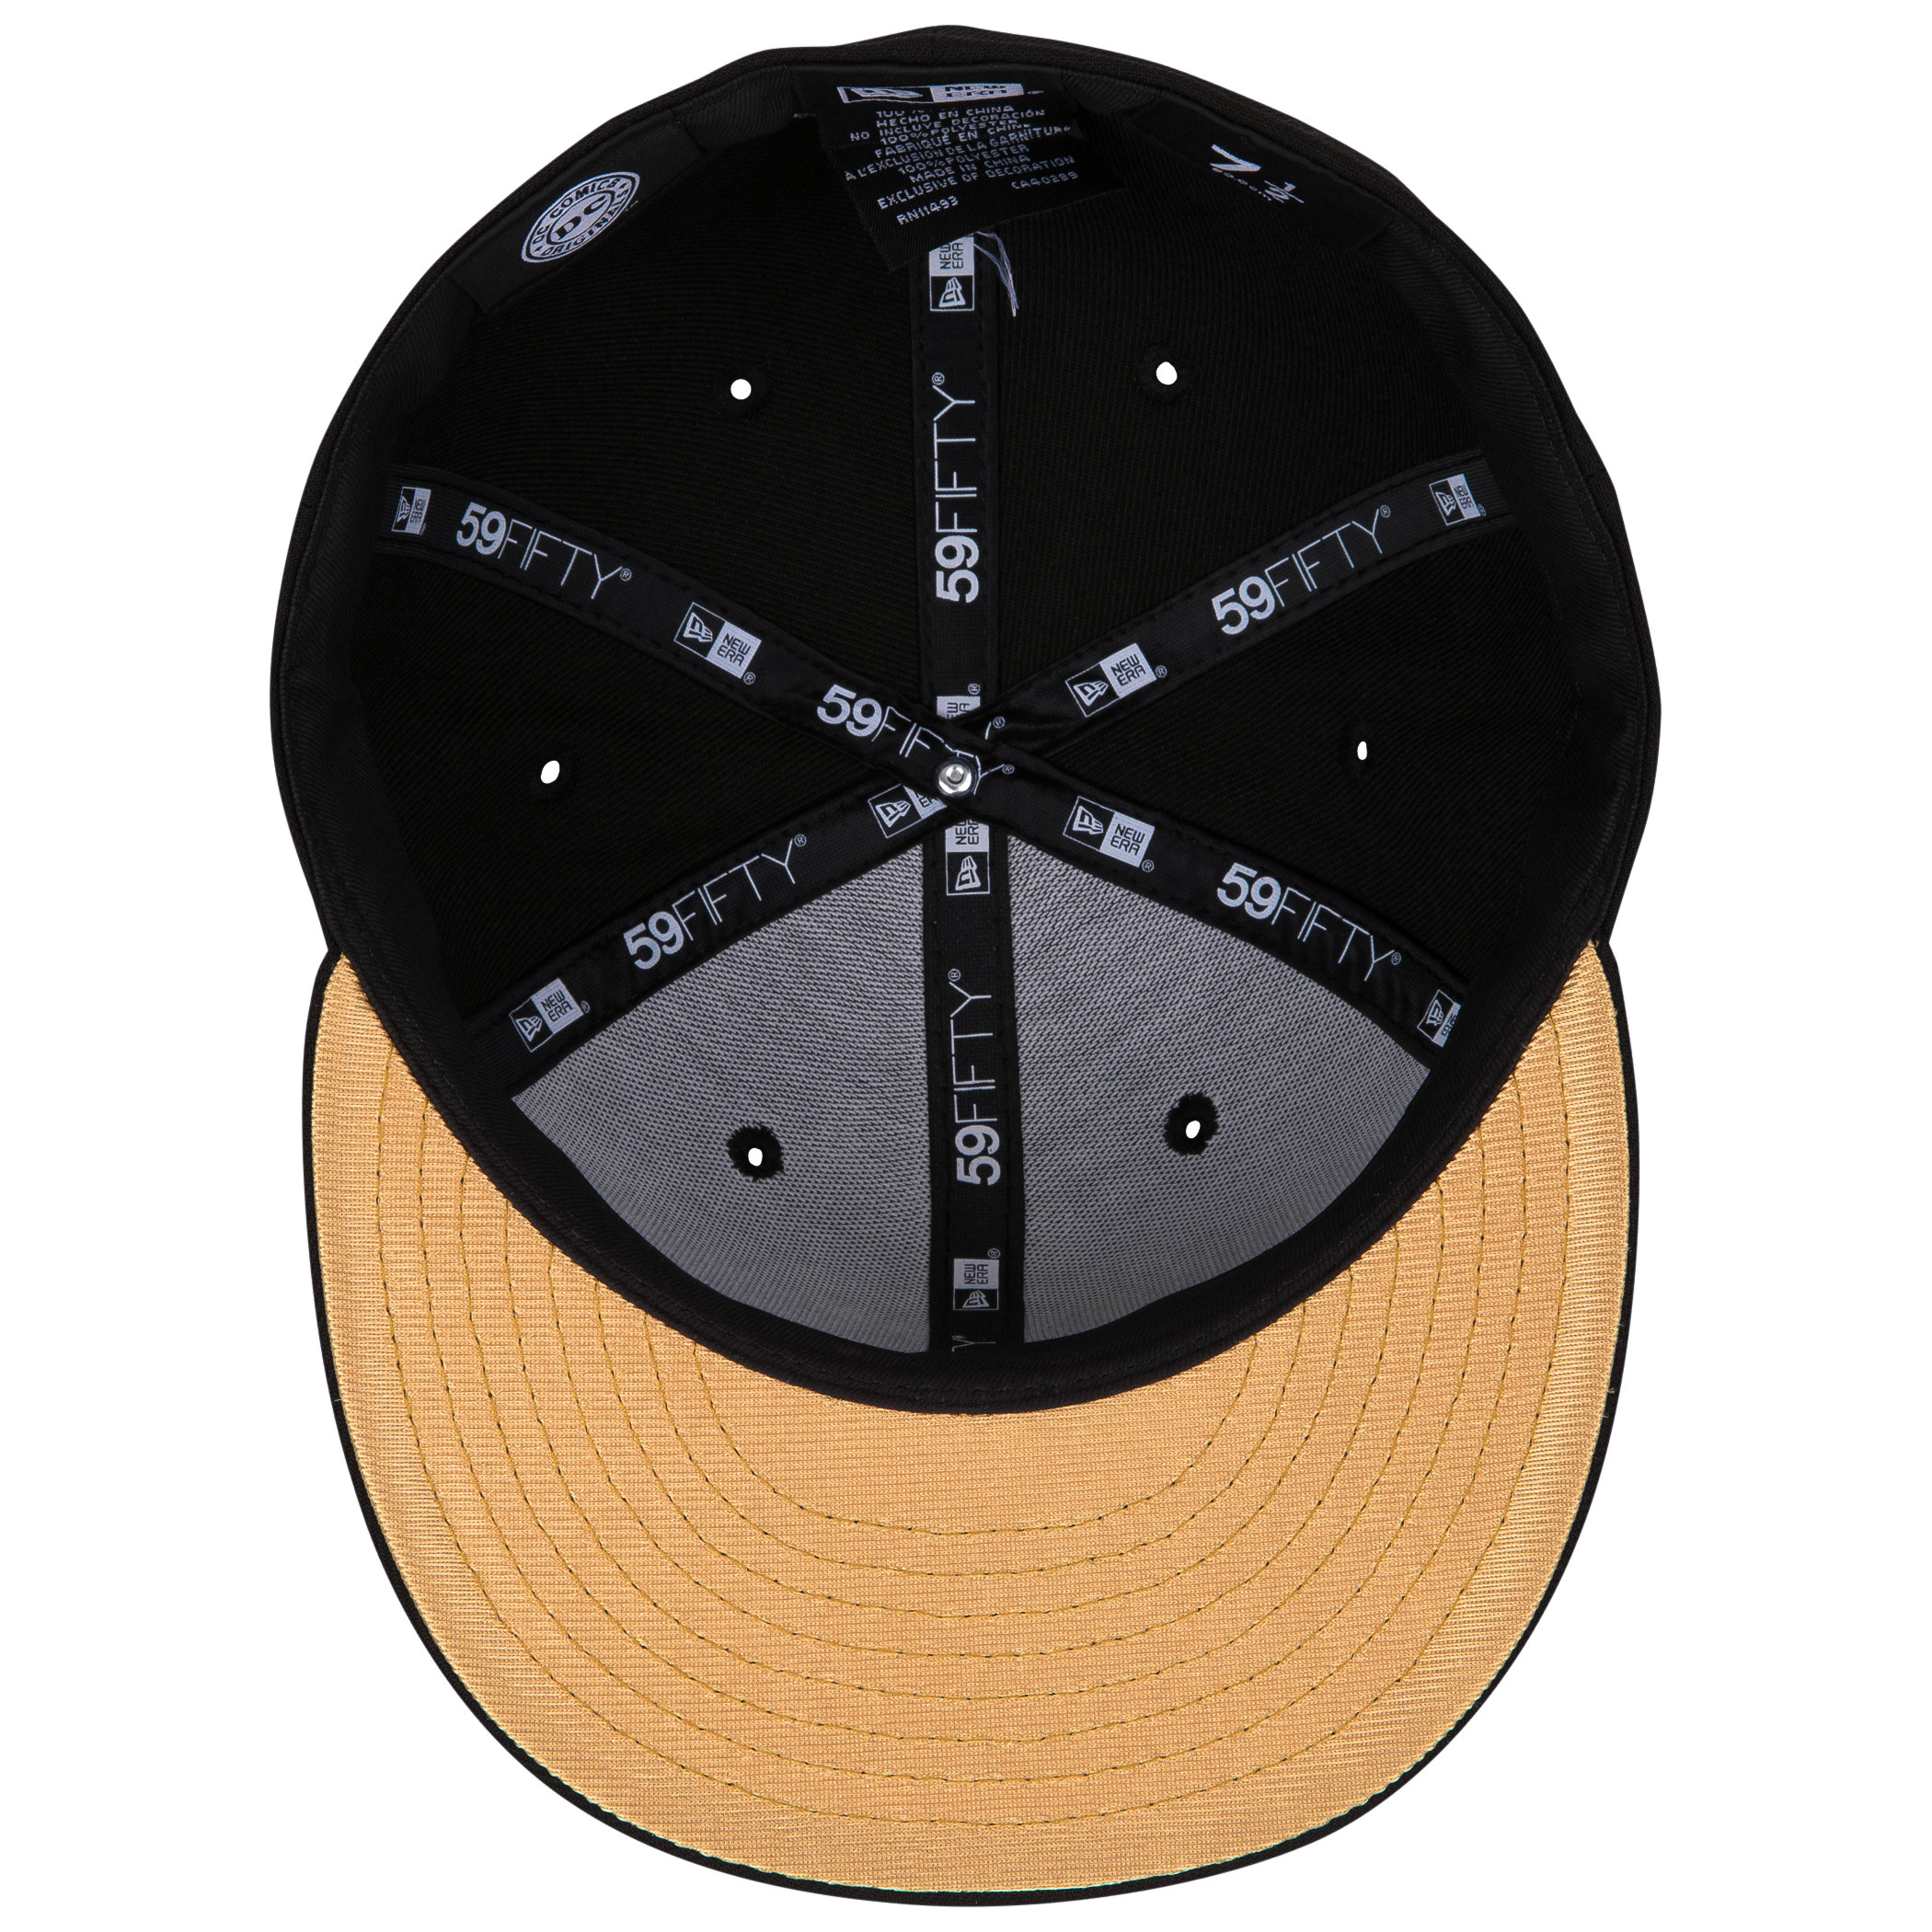 Superman Gold Logo Black Colorway New Era 59Fifty Fitted Hat